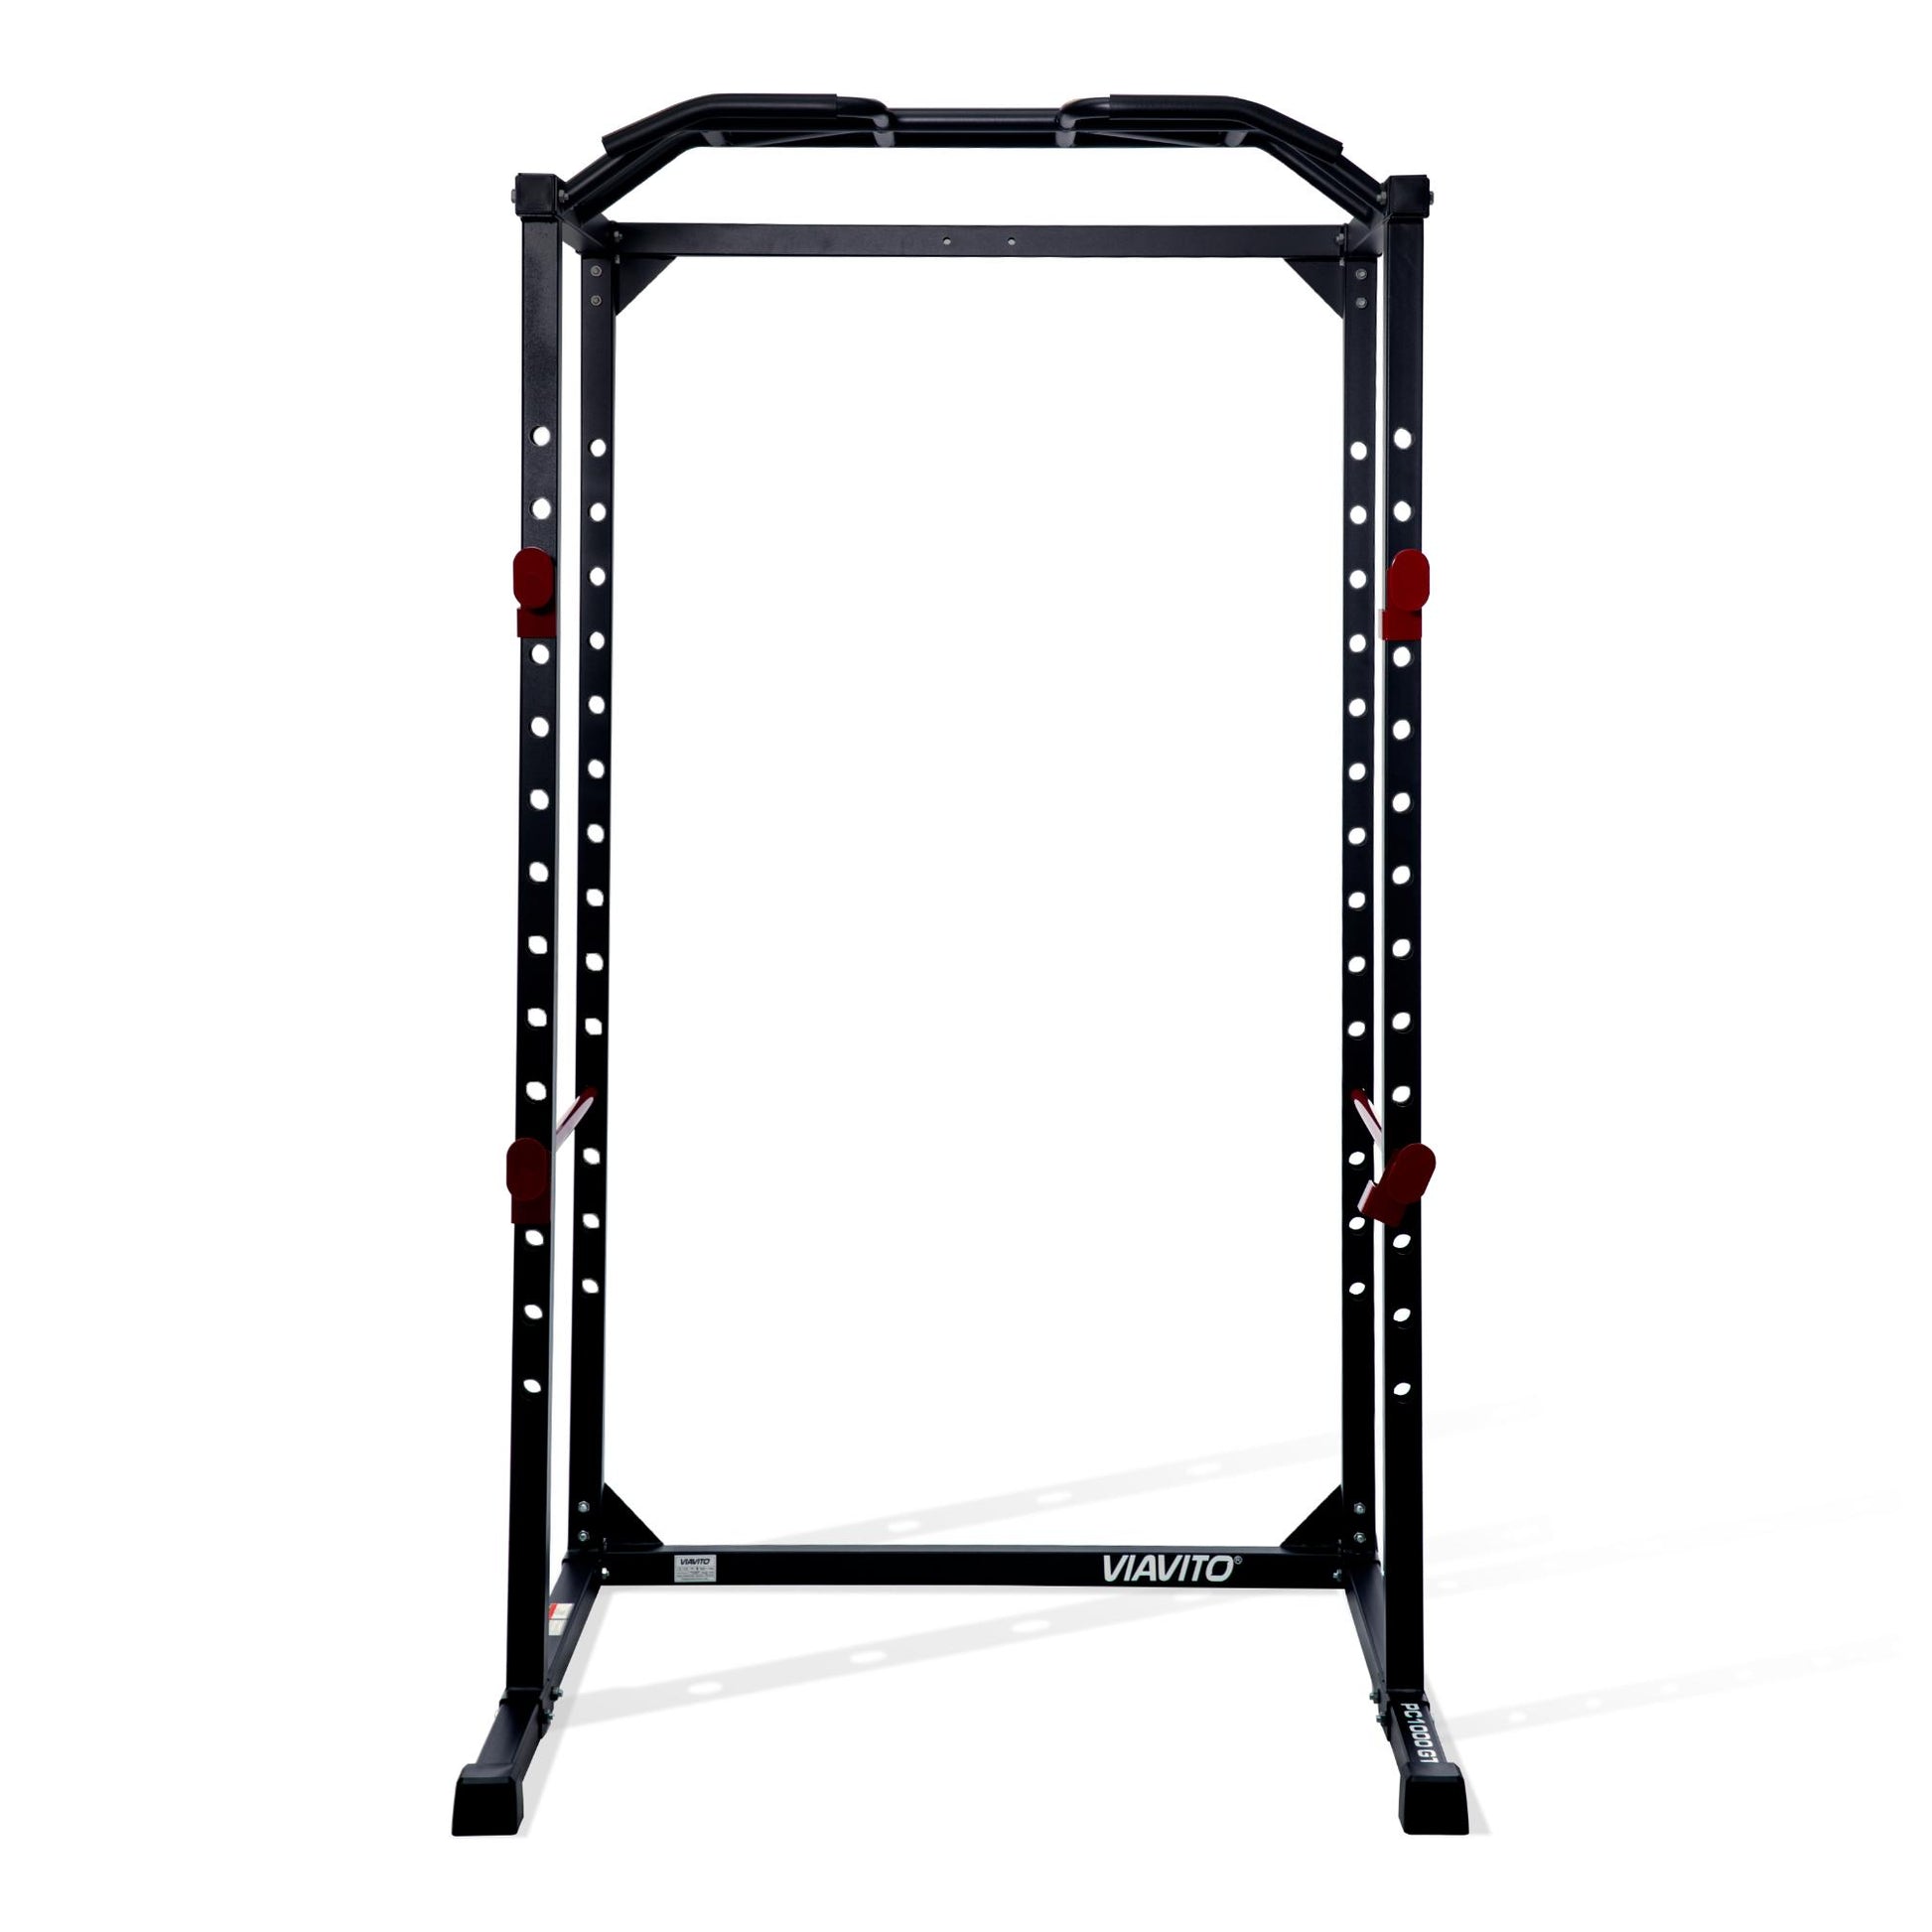 |Viavito PC1000 GT Power Cage - back updated|